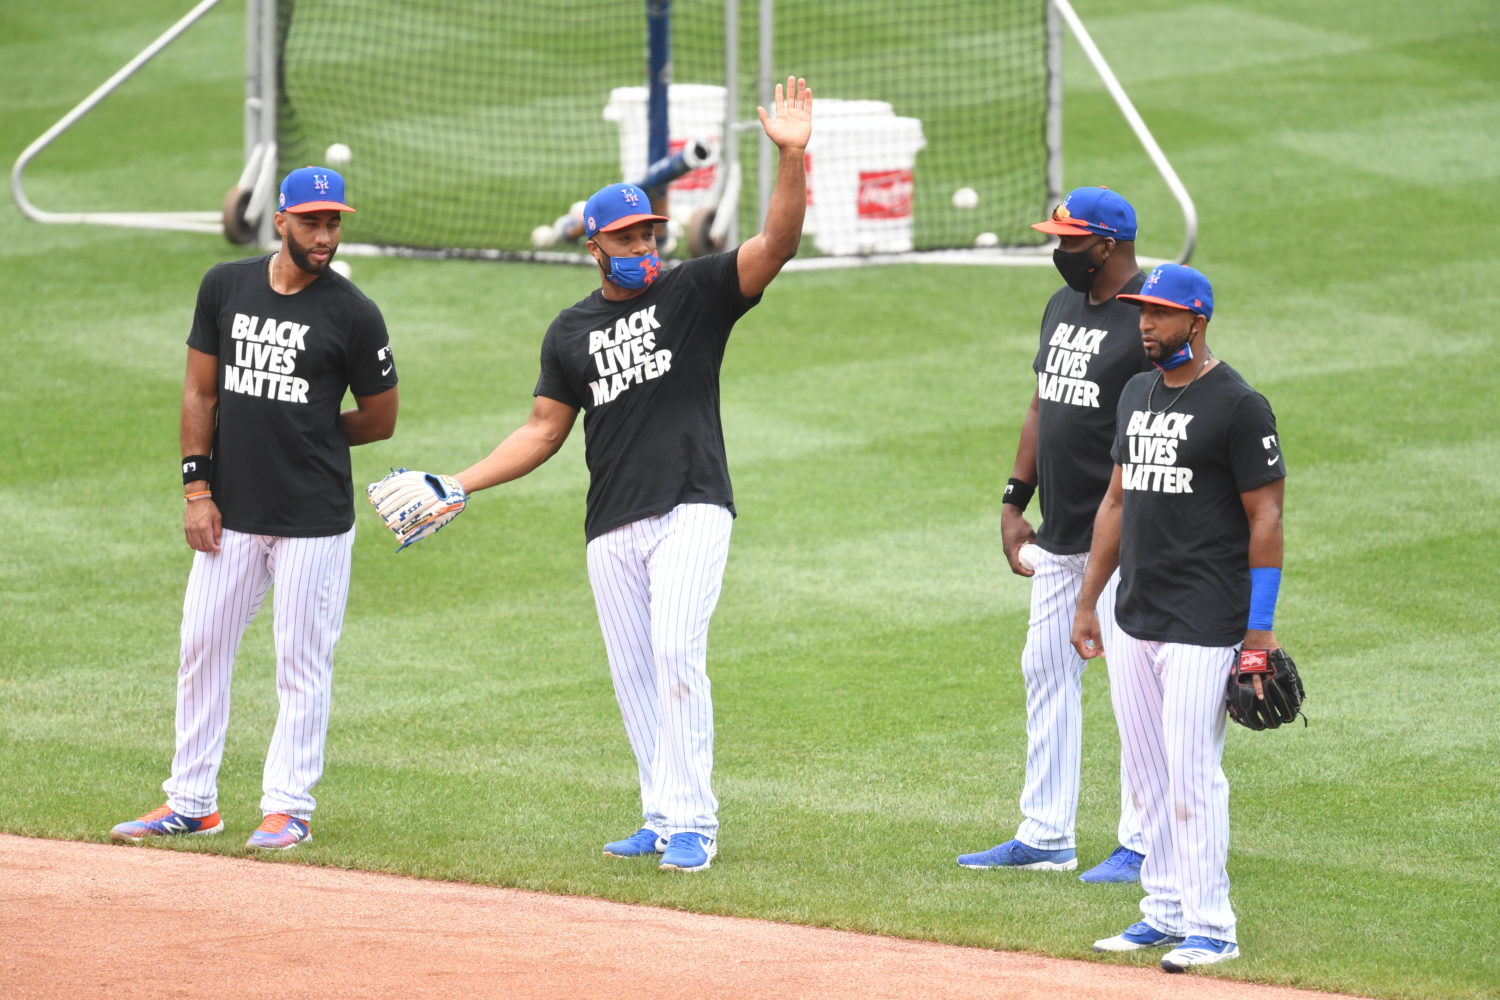 Four Mets Players Wearing Black Lives Matter T-Shirts on the Field